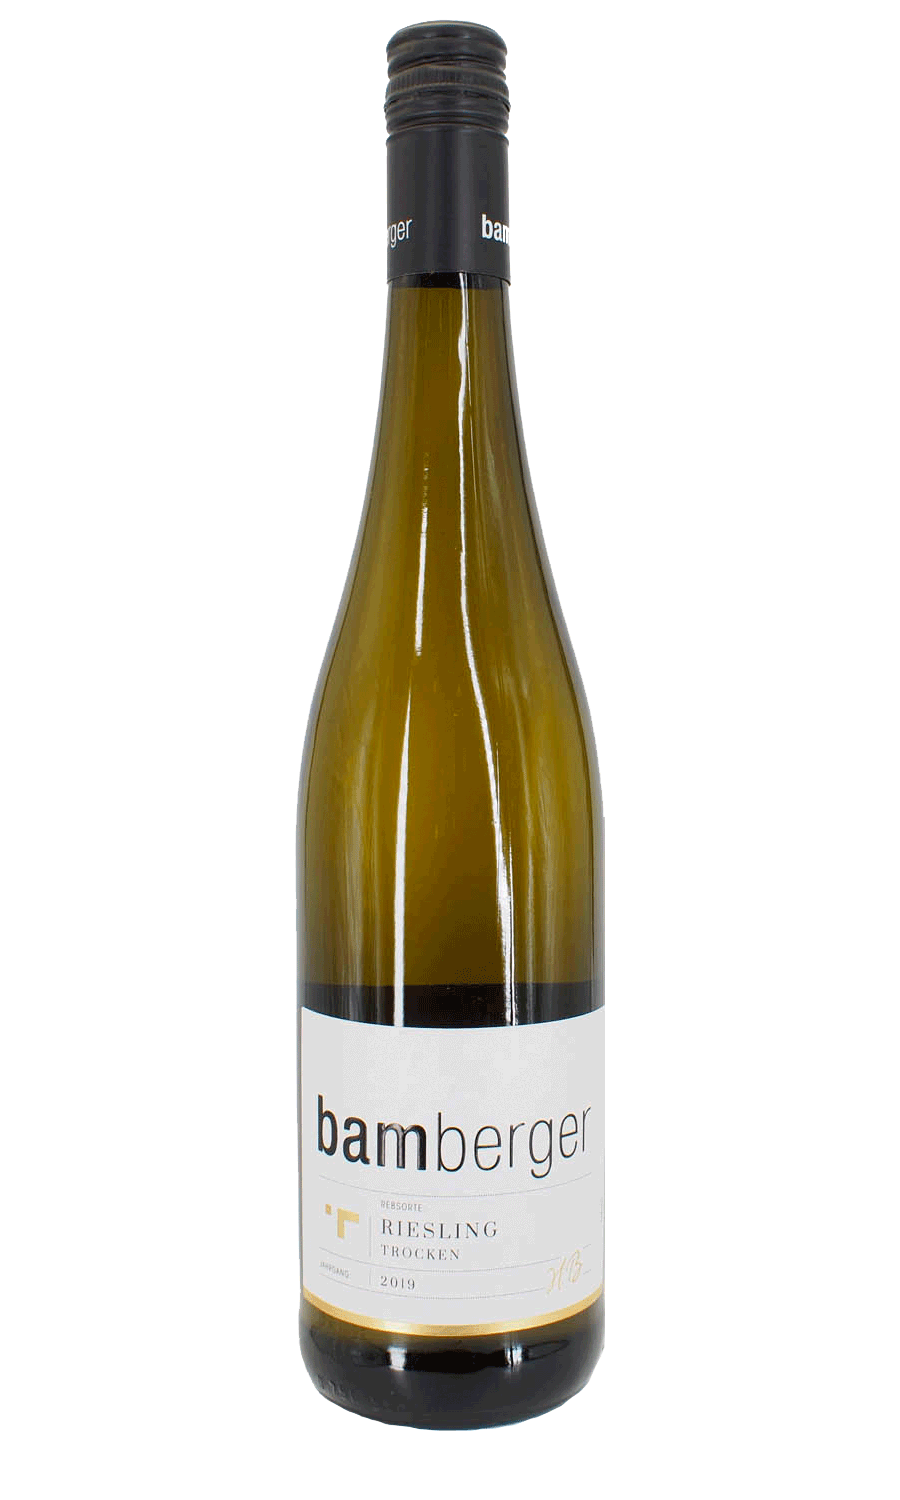 Bamberger Riesling